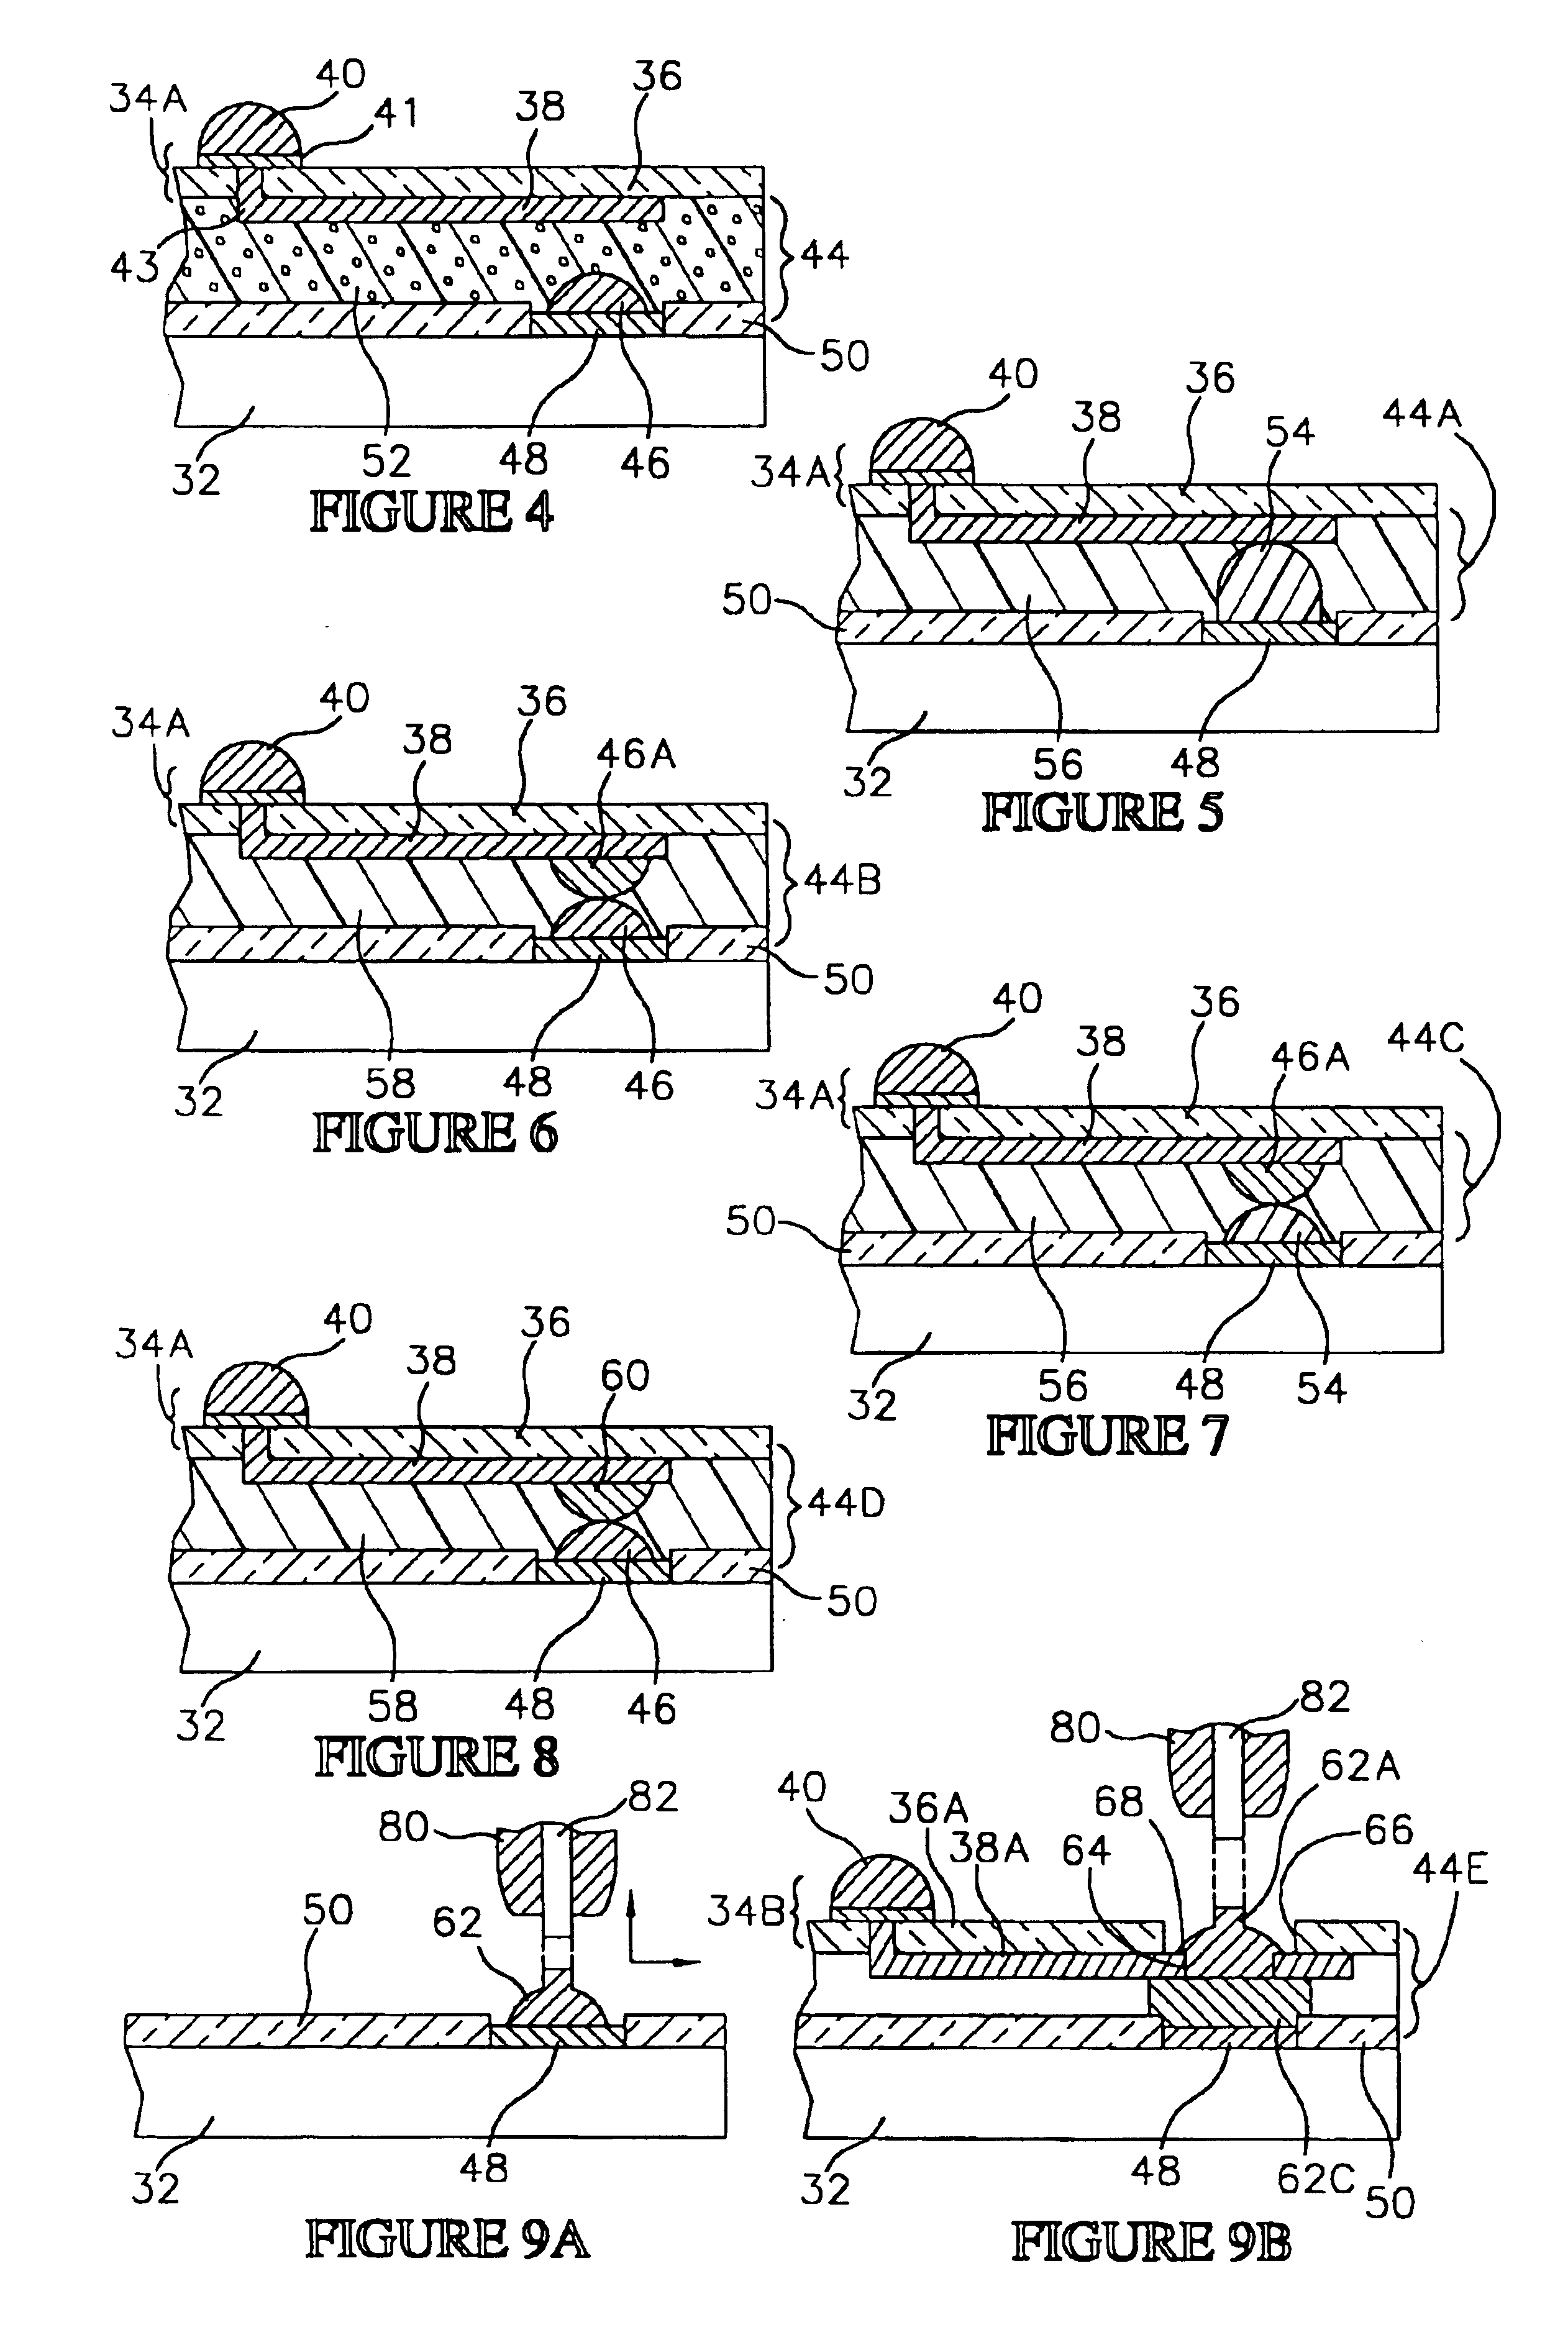 Semiconductor package having flex circuit with external contacts